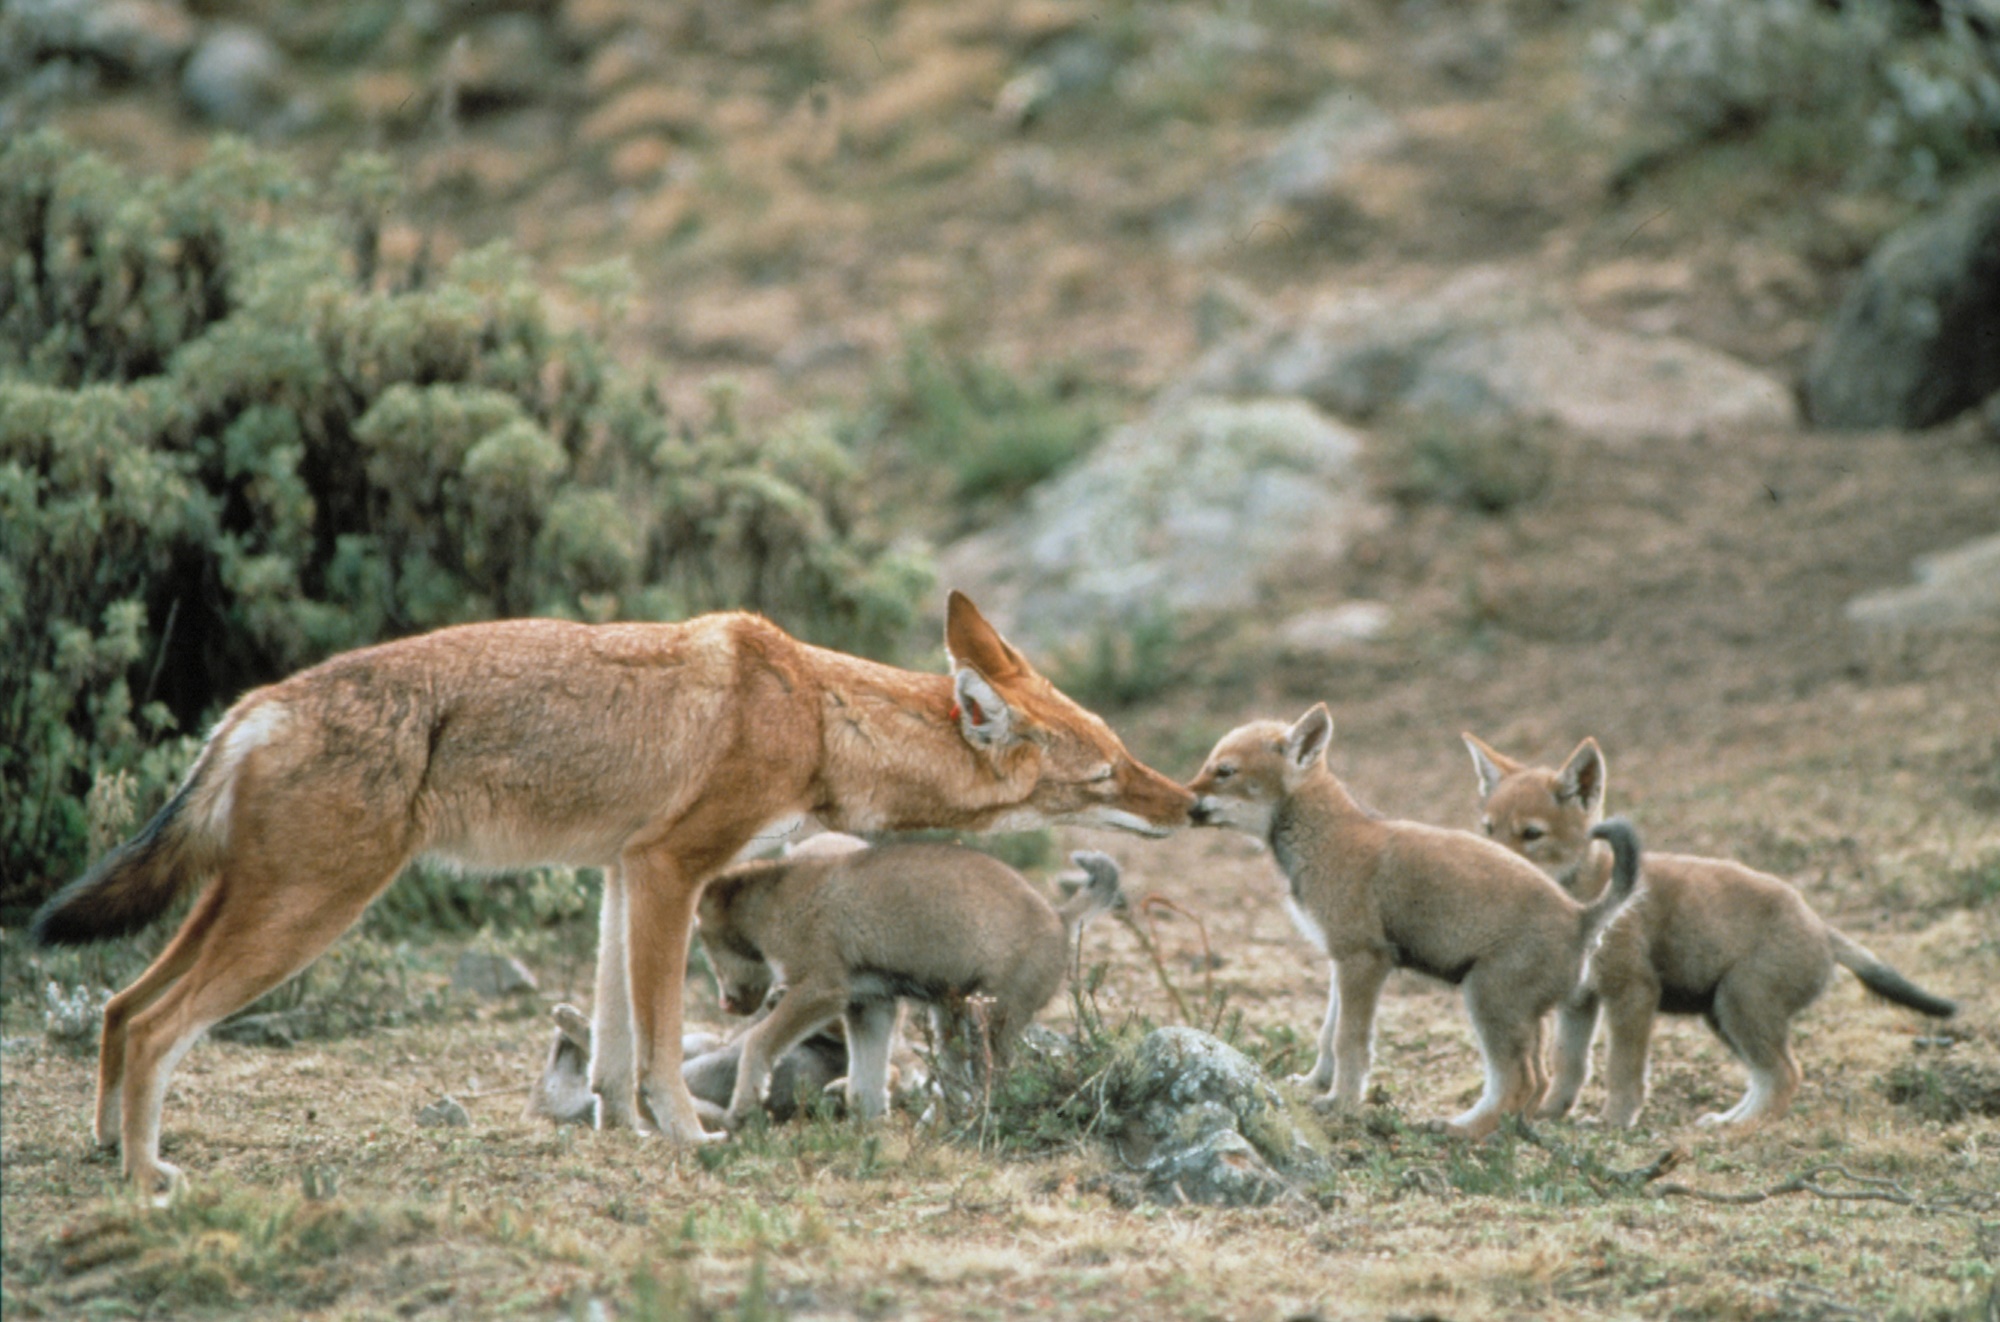 Ethiopian wolves by Claudio Sillero